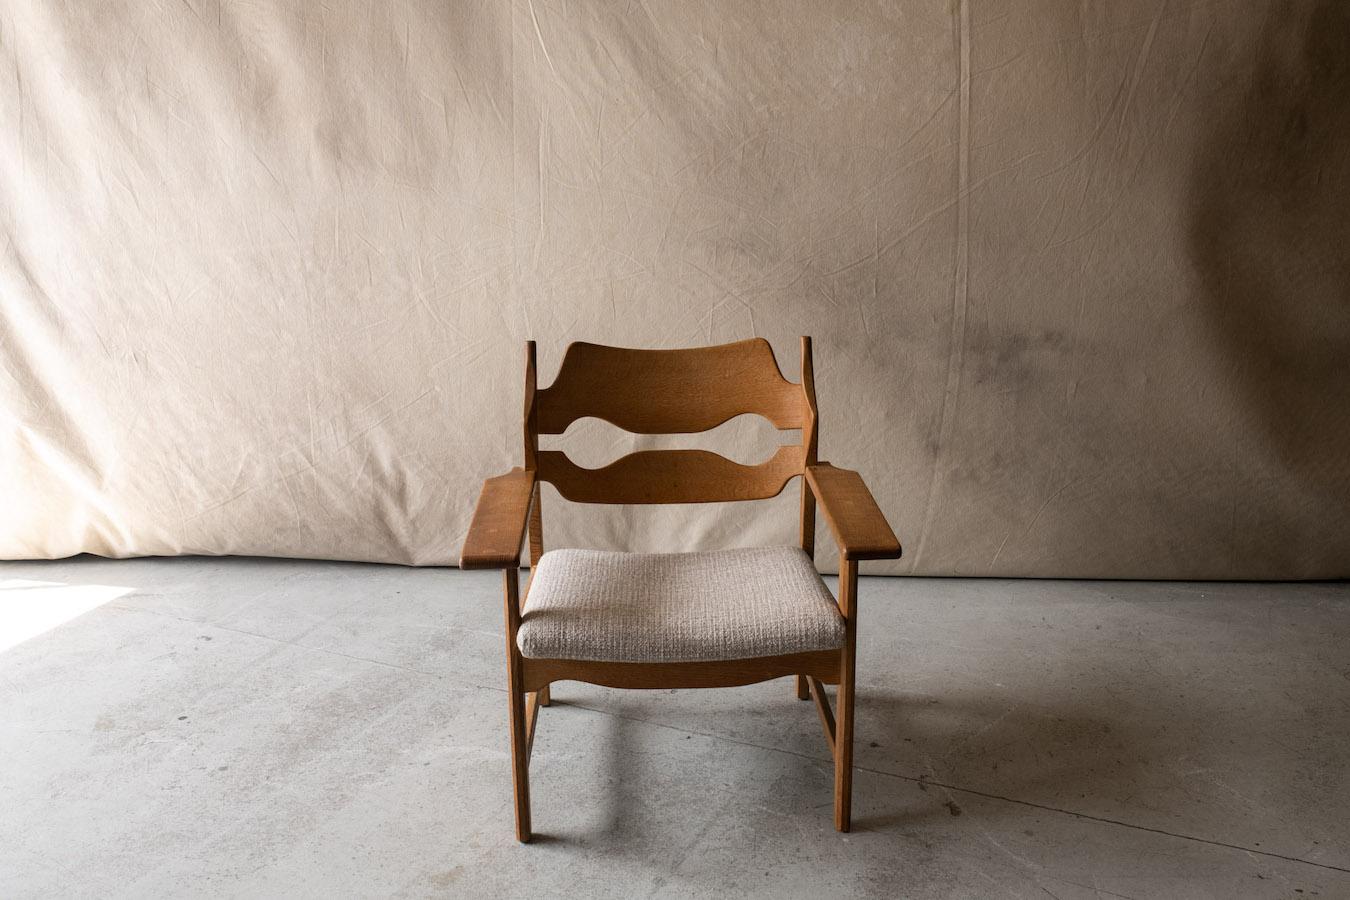 Henning Kjaernulf razor blade lounge chair, Denmark, circa 1960. Solid oak construction. Seat upholstered in woven linen fabric. Manufactured by Nyrup Møbelfabrik, Denmark 1960.

We don't have the time to write an extensive description on each of